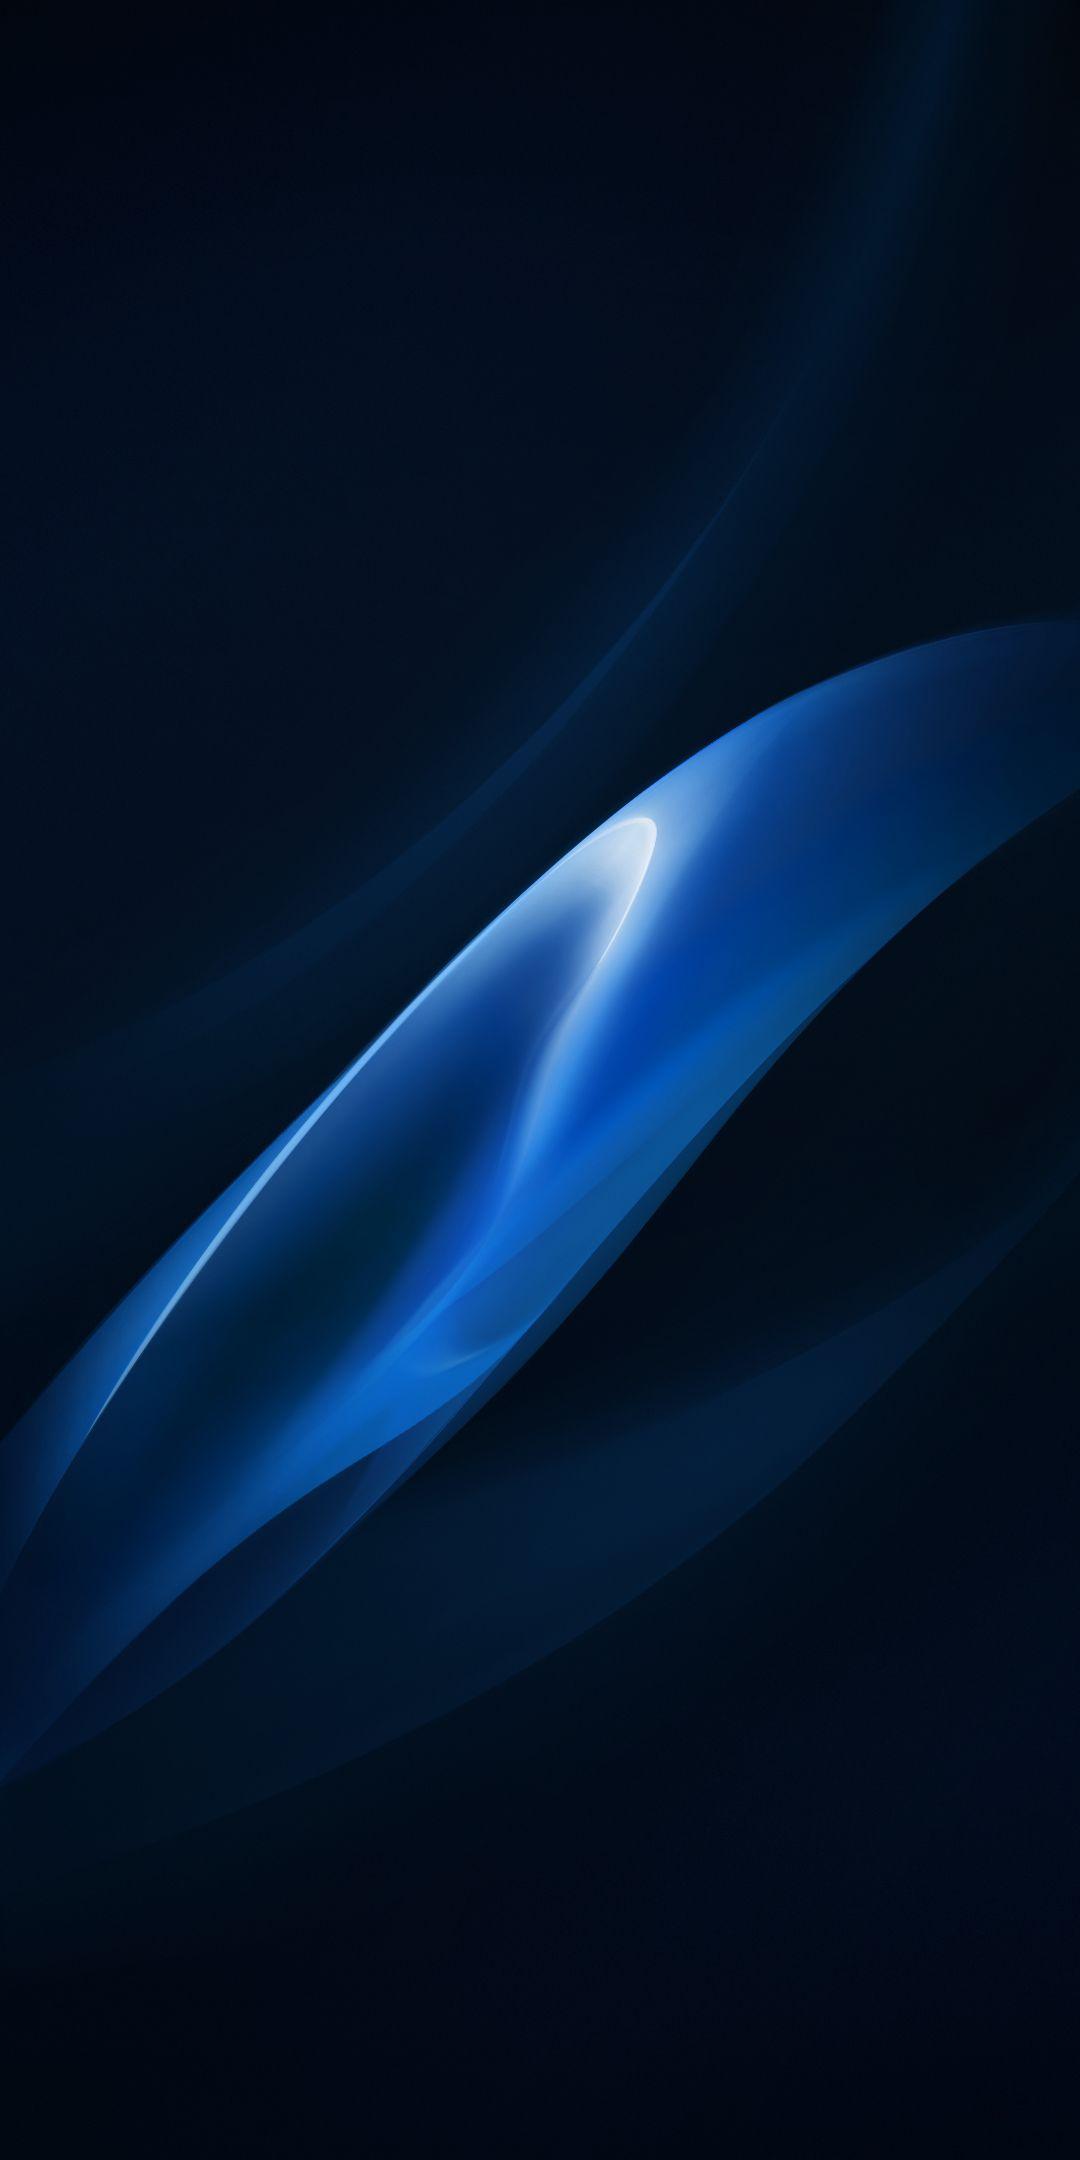 Xiaomi Redmi Note 5 Pro Wallpapers with Abstract Blue Light